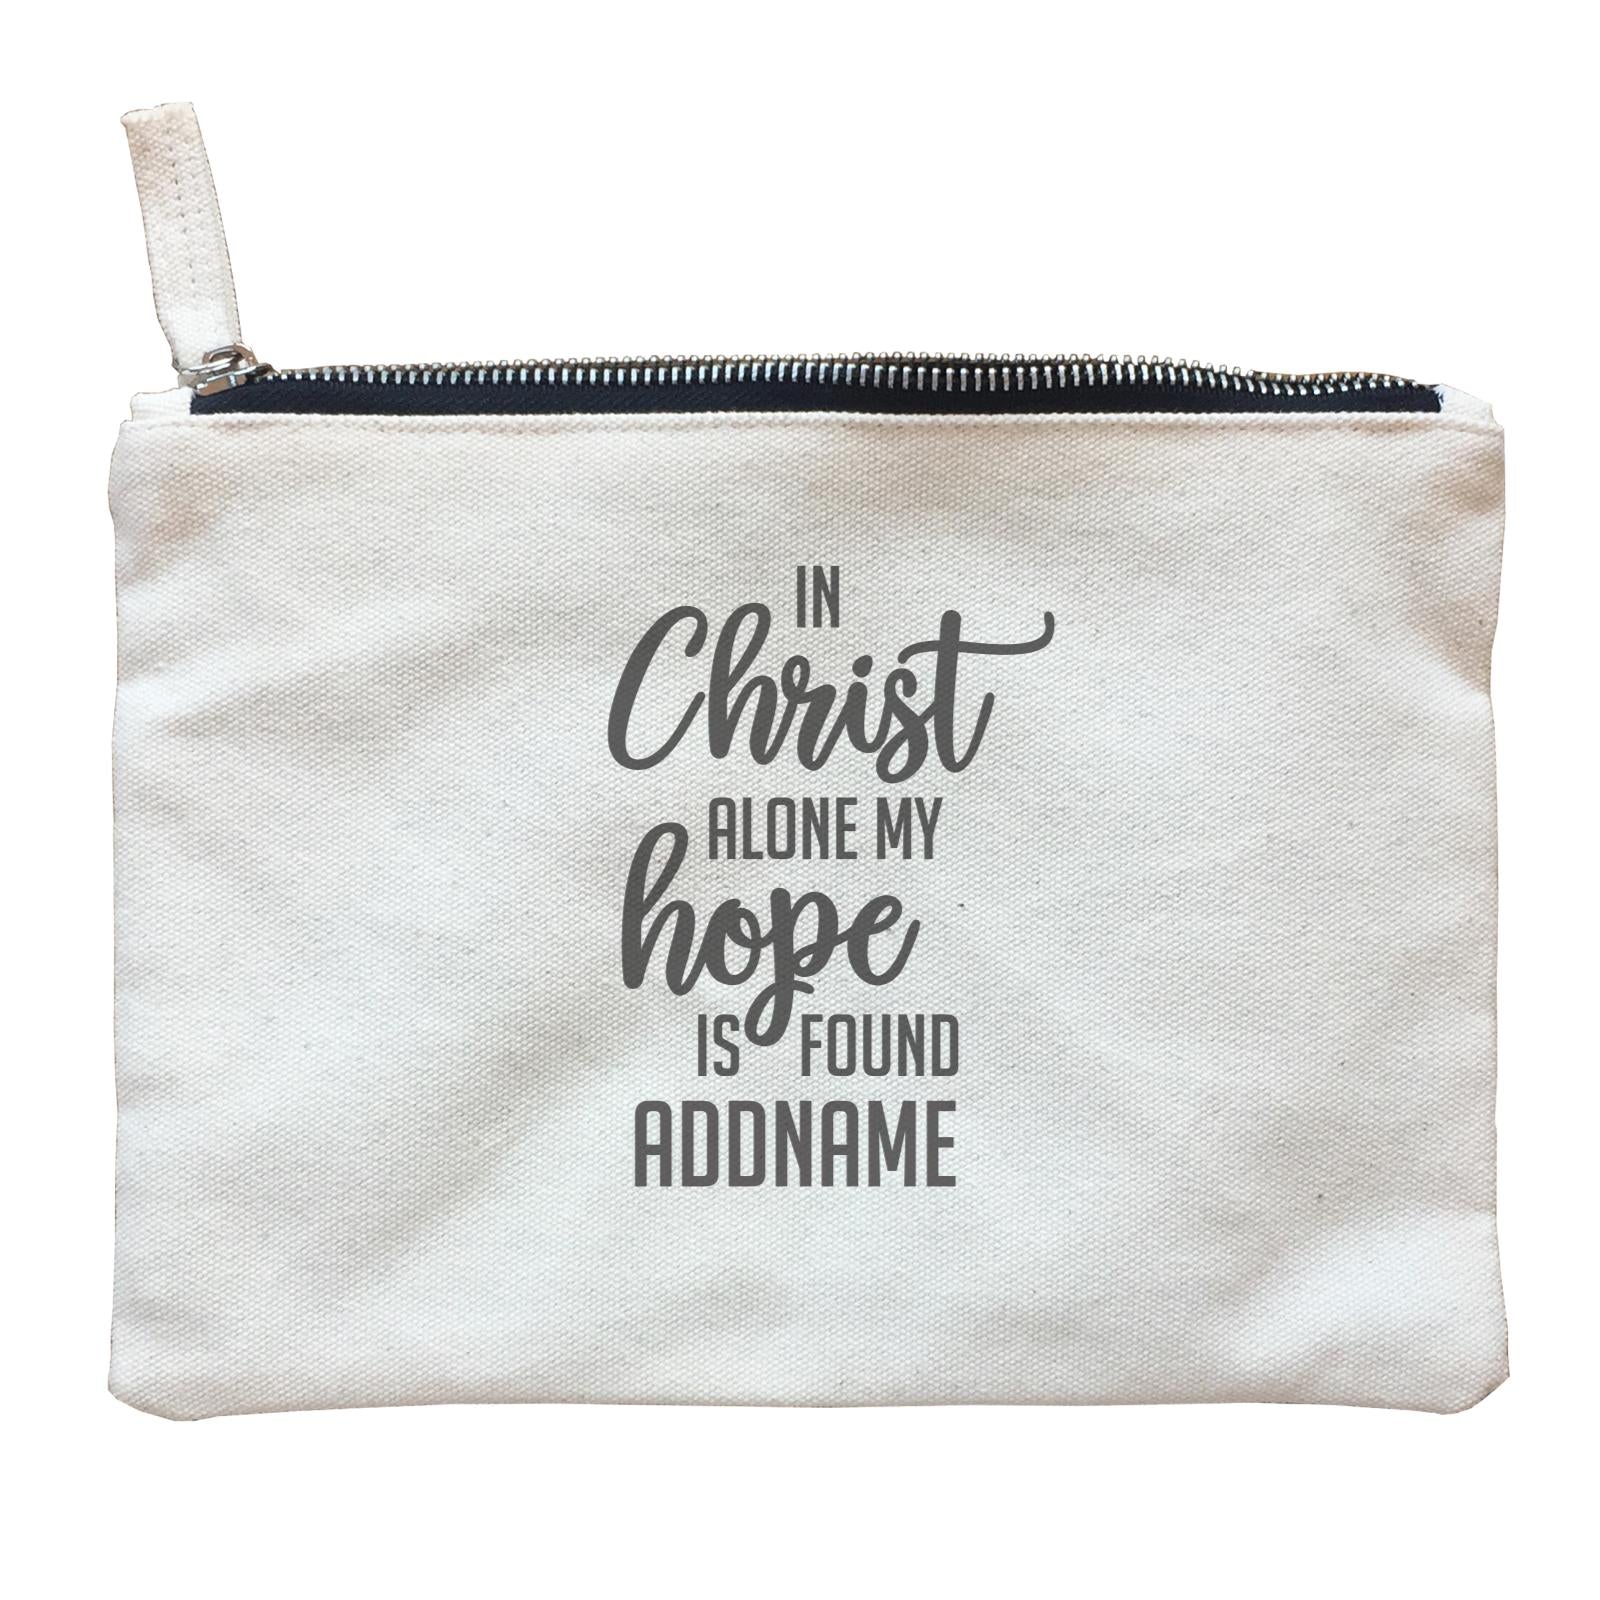 Christian Series In Christ Alone My Hope Is Found Addname Zipper Pouch